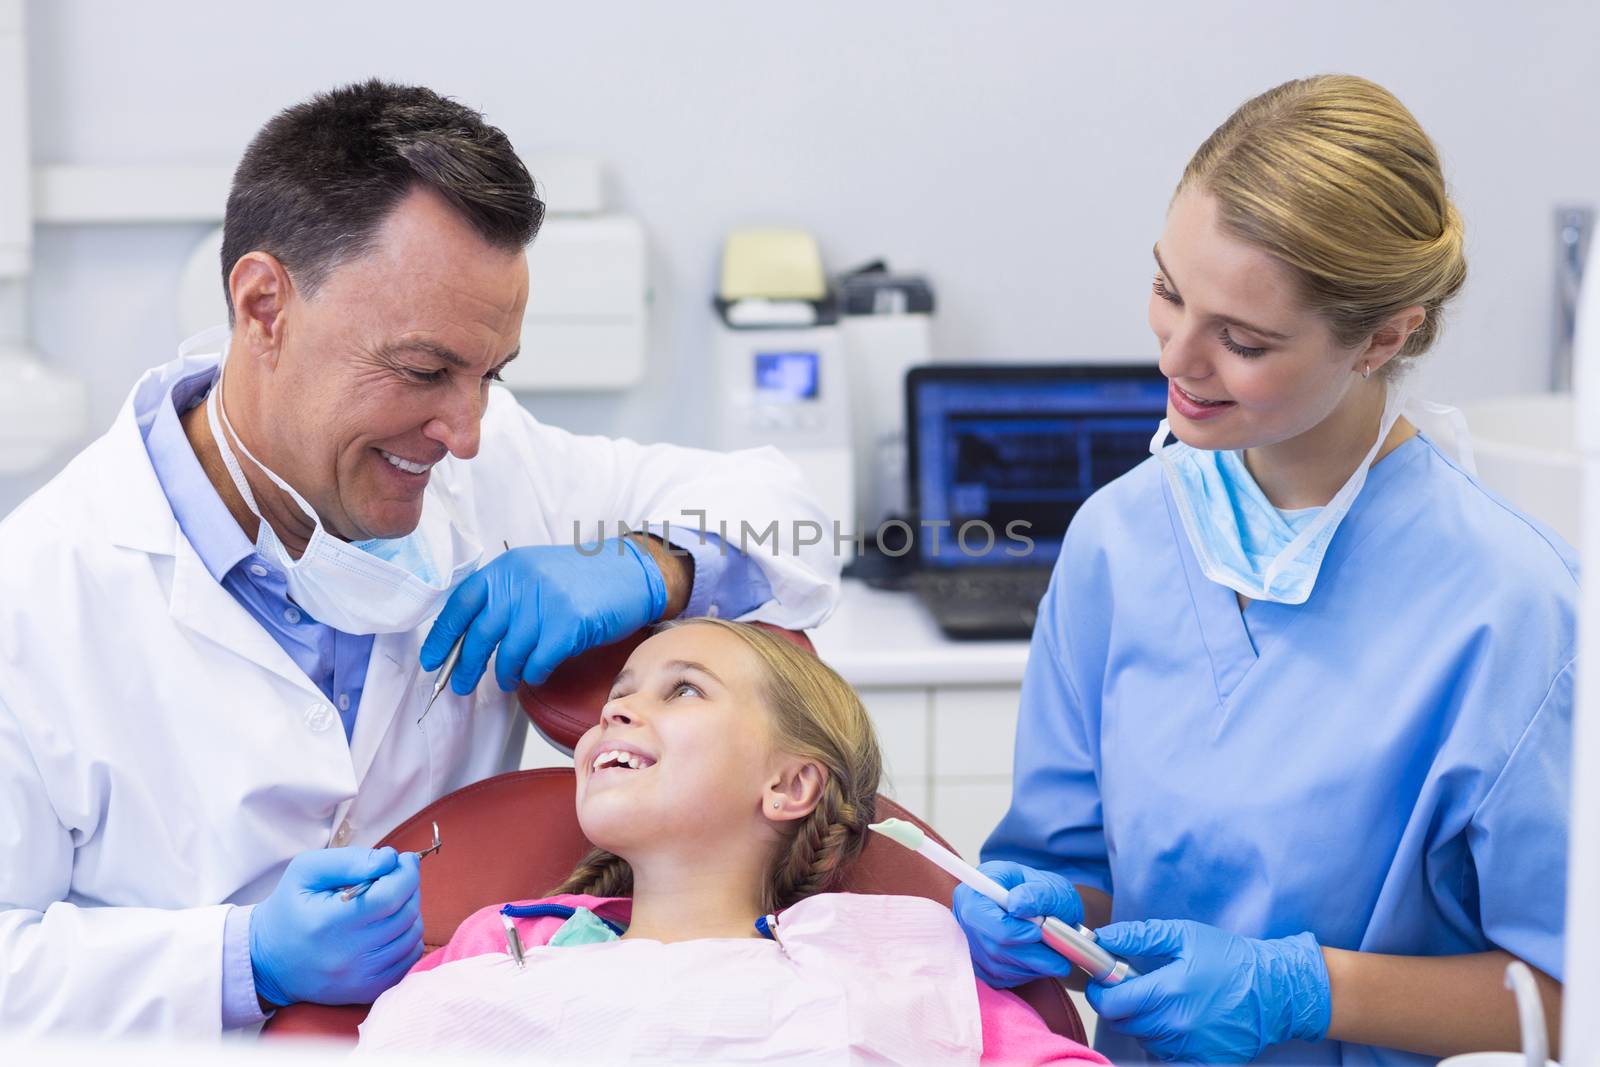 Dentist and nurse interacting with a young patient in clinic